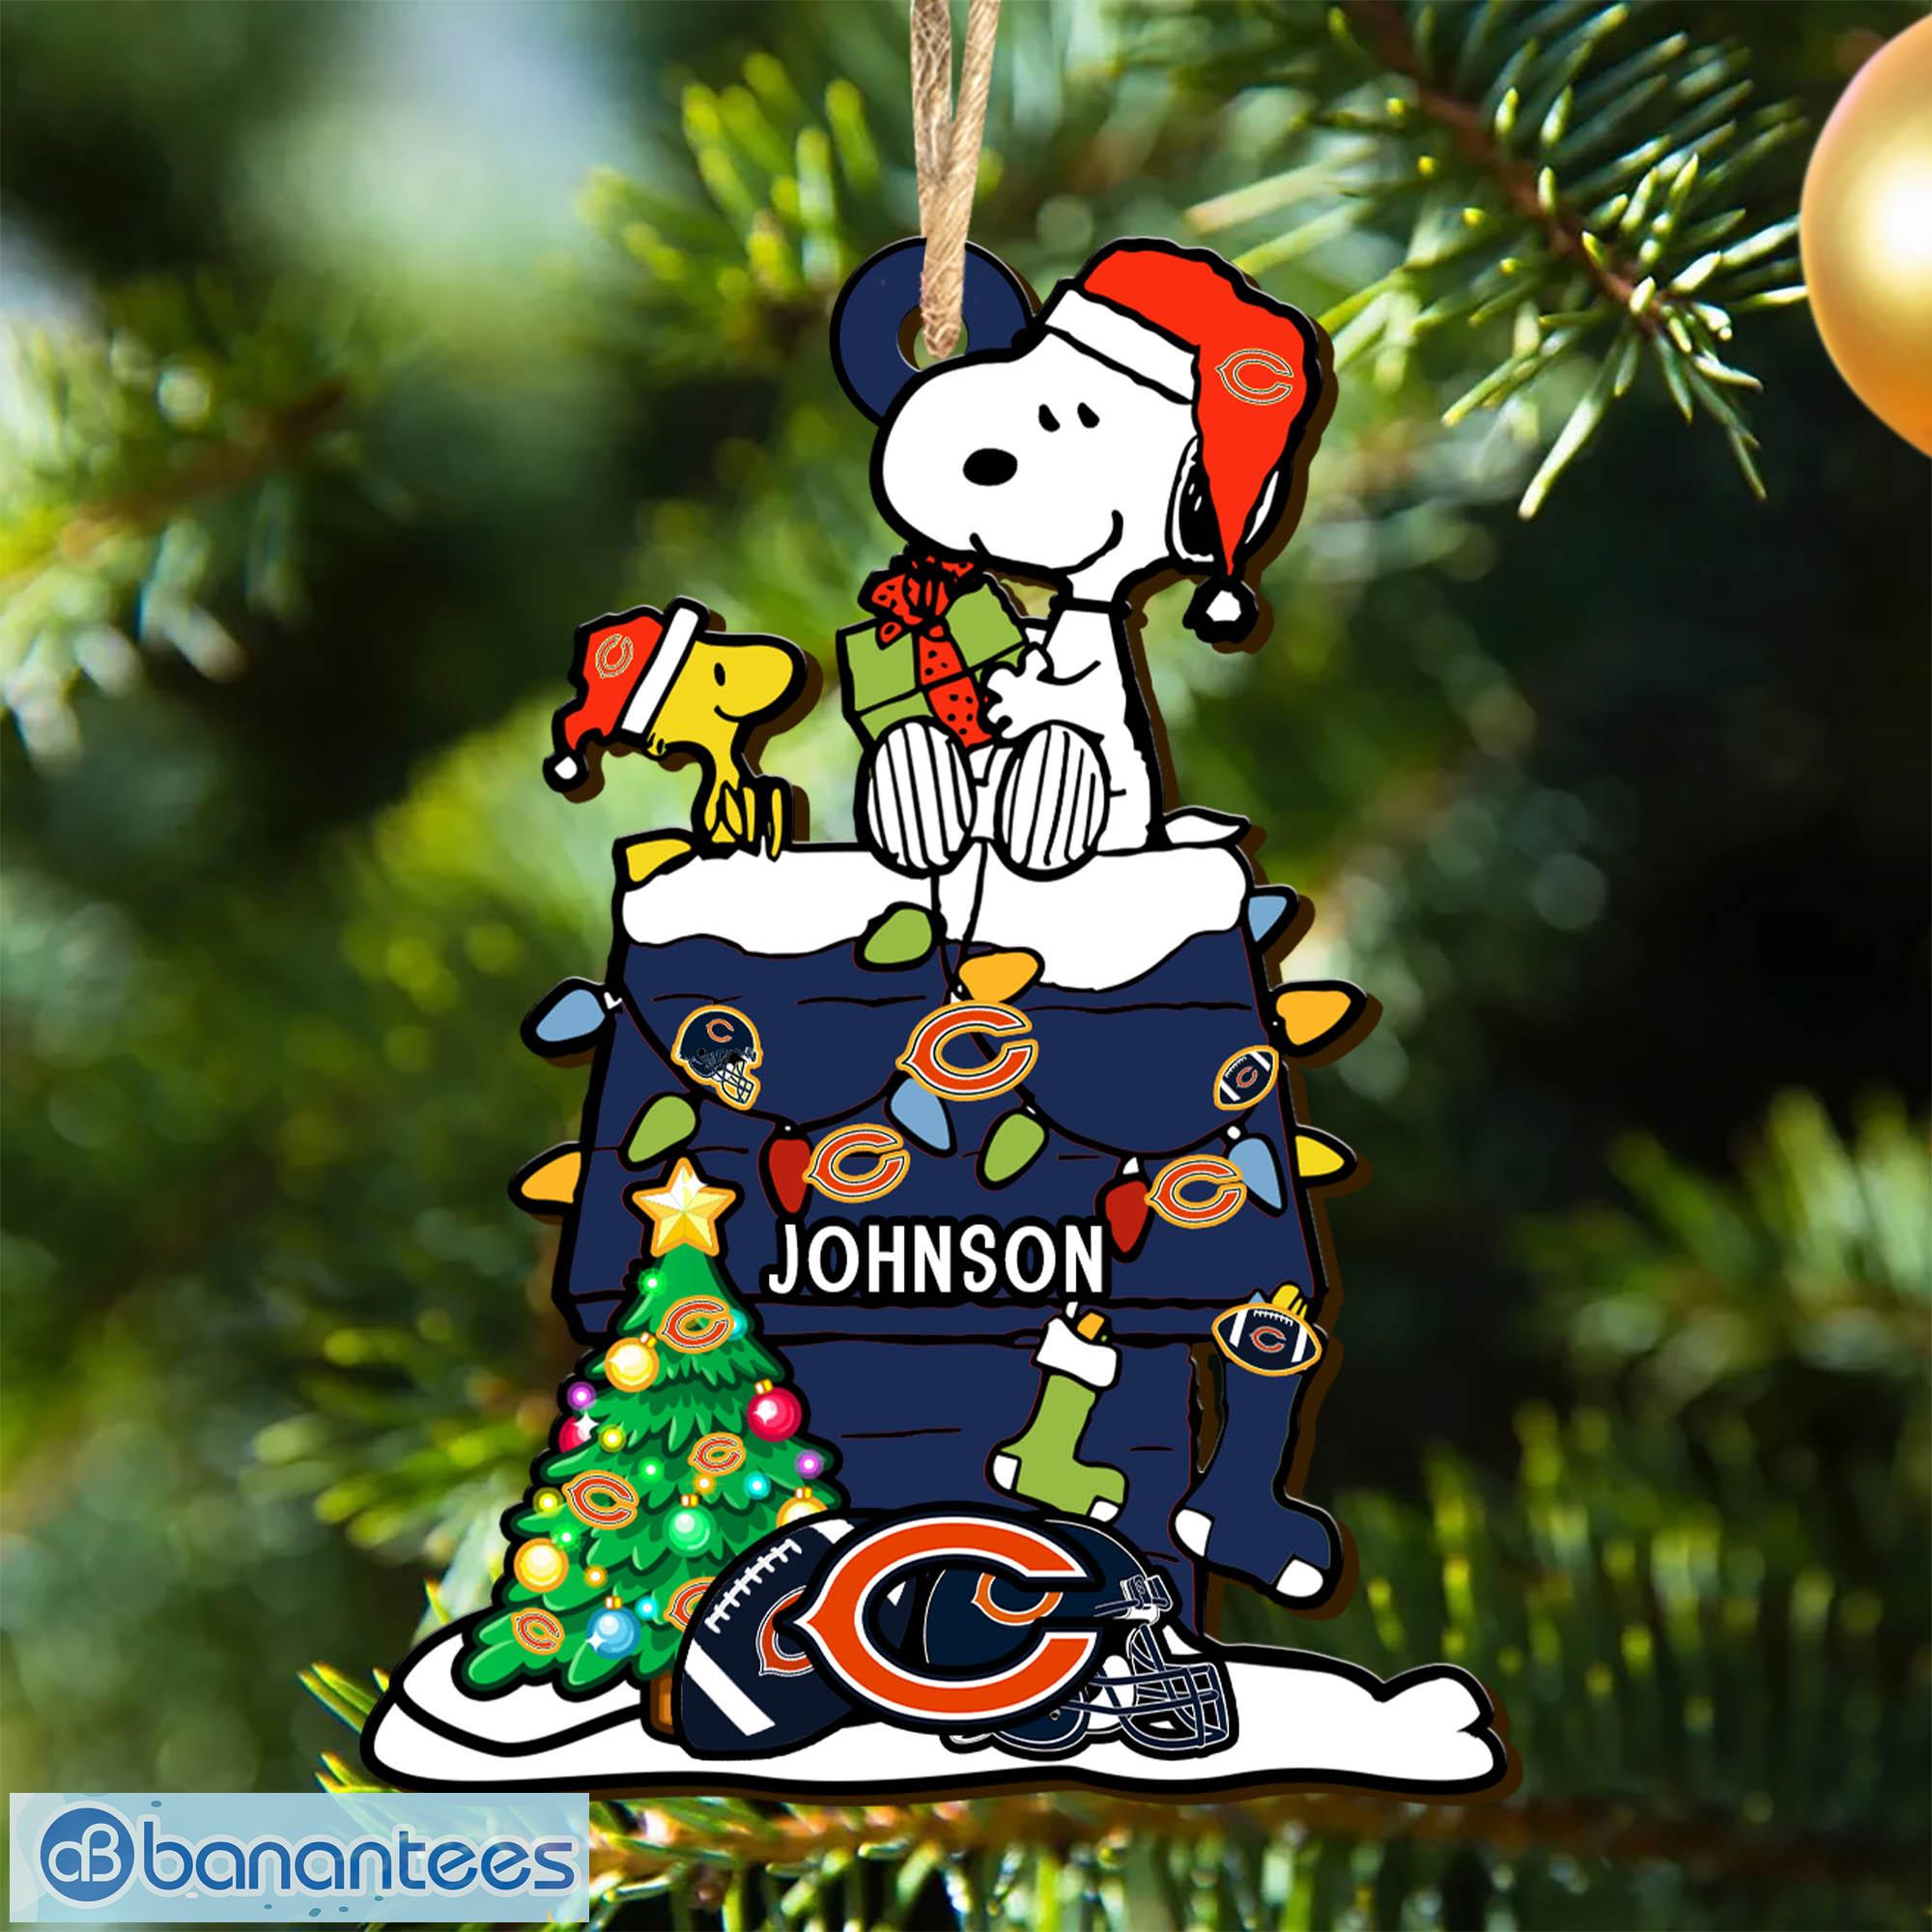 Bear Christmas Ornament - Personalized Gallery